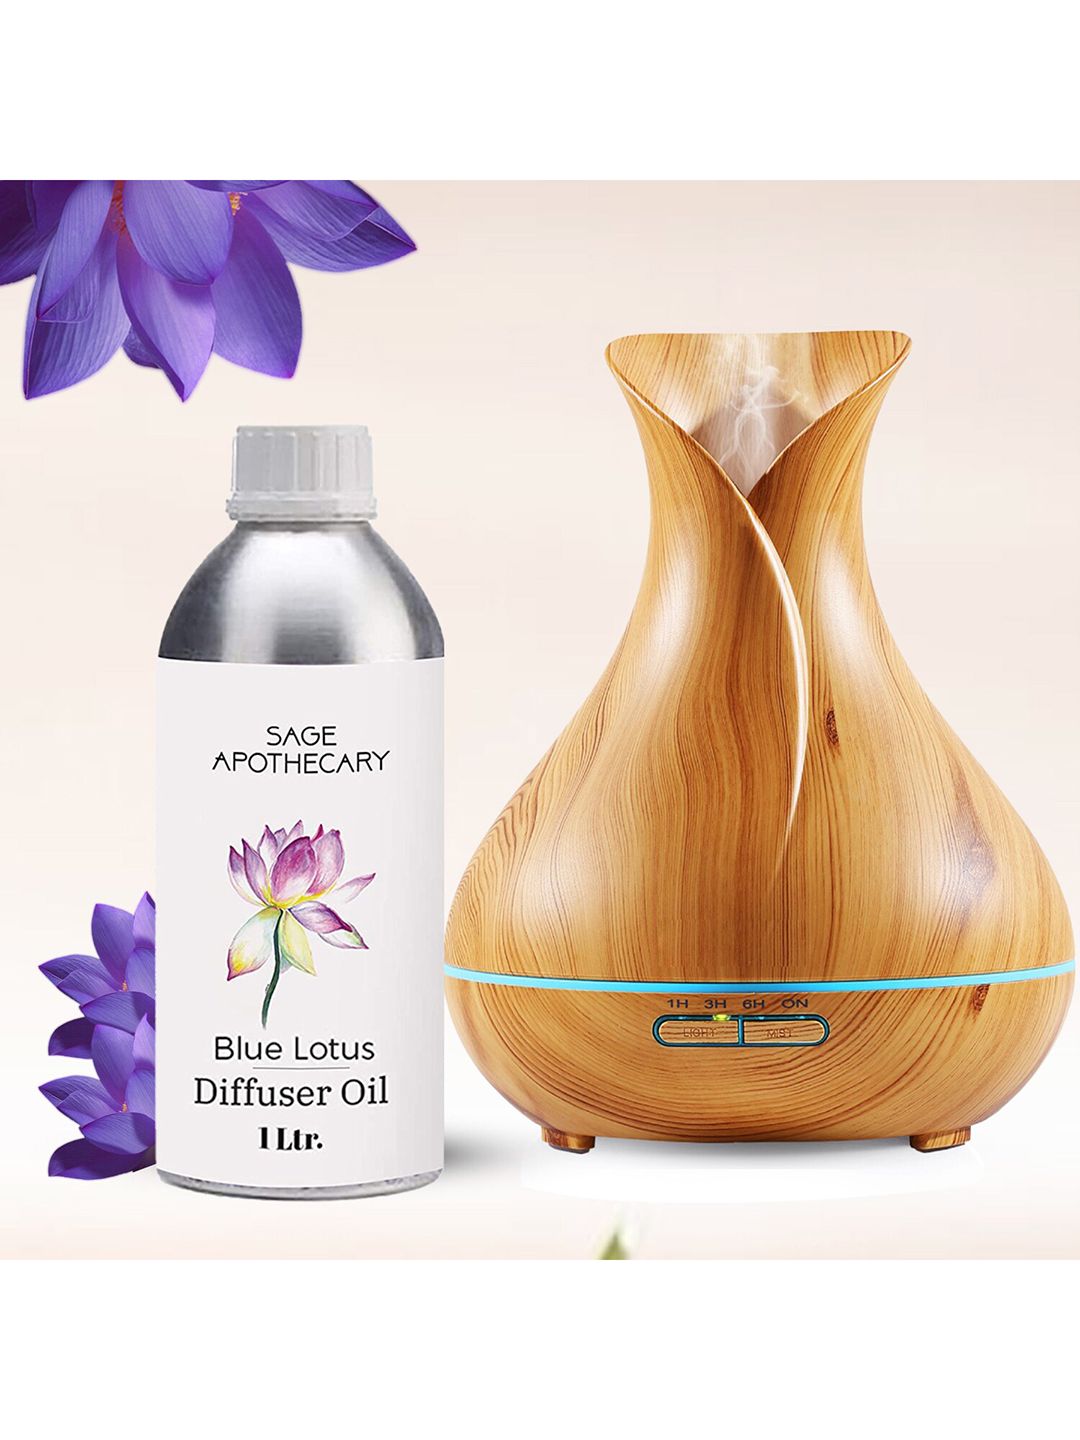 SAGE APOTHECARY Blue Lotus Diffuser Oil for Anxiety Free Sleep - 1 Litre Price in India